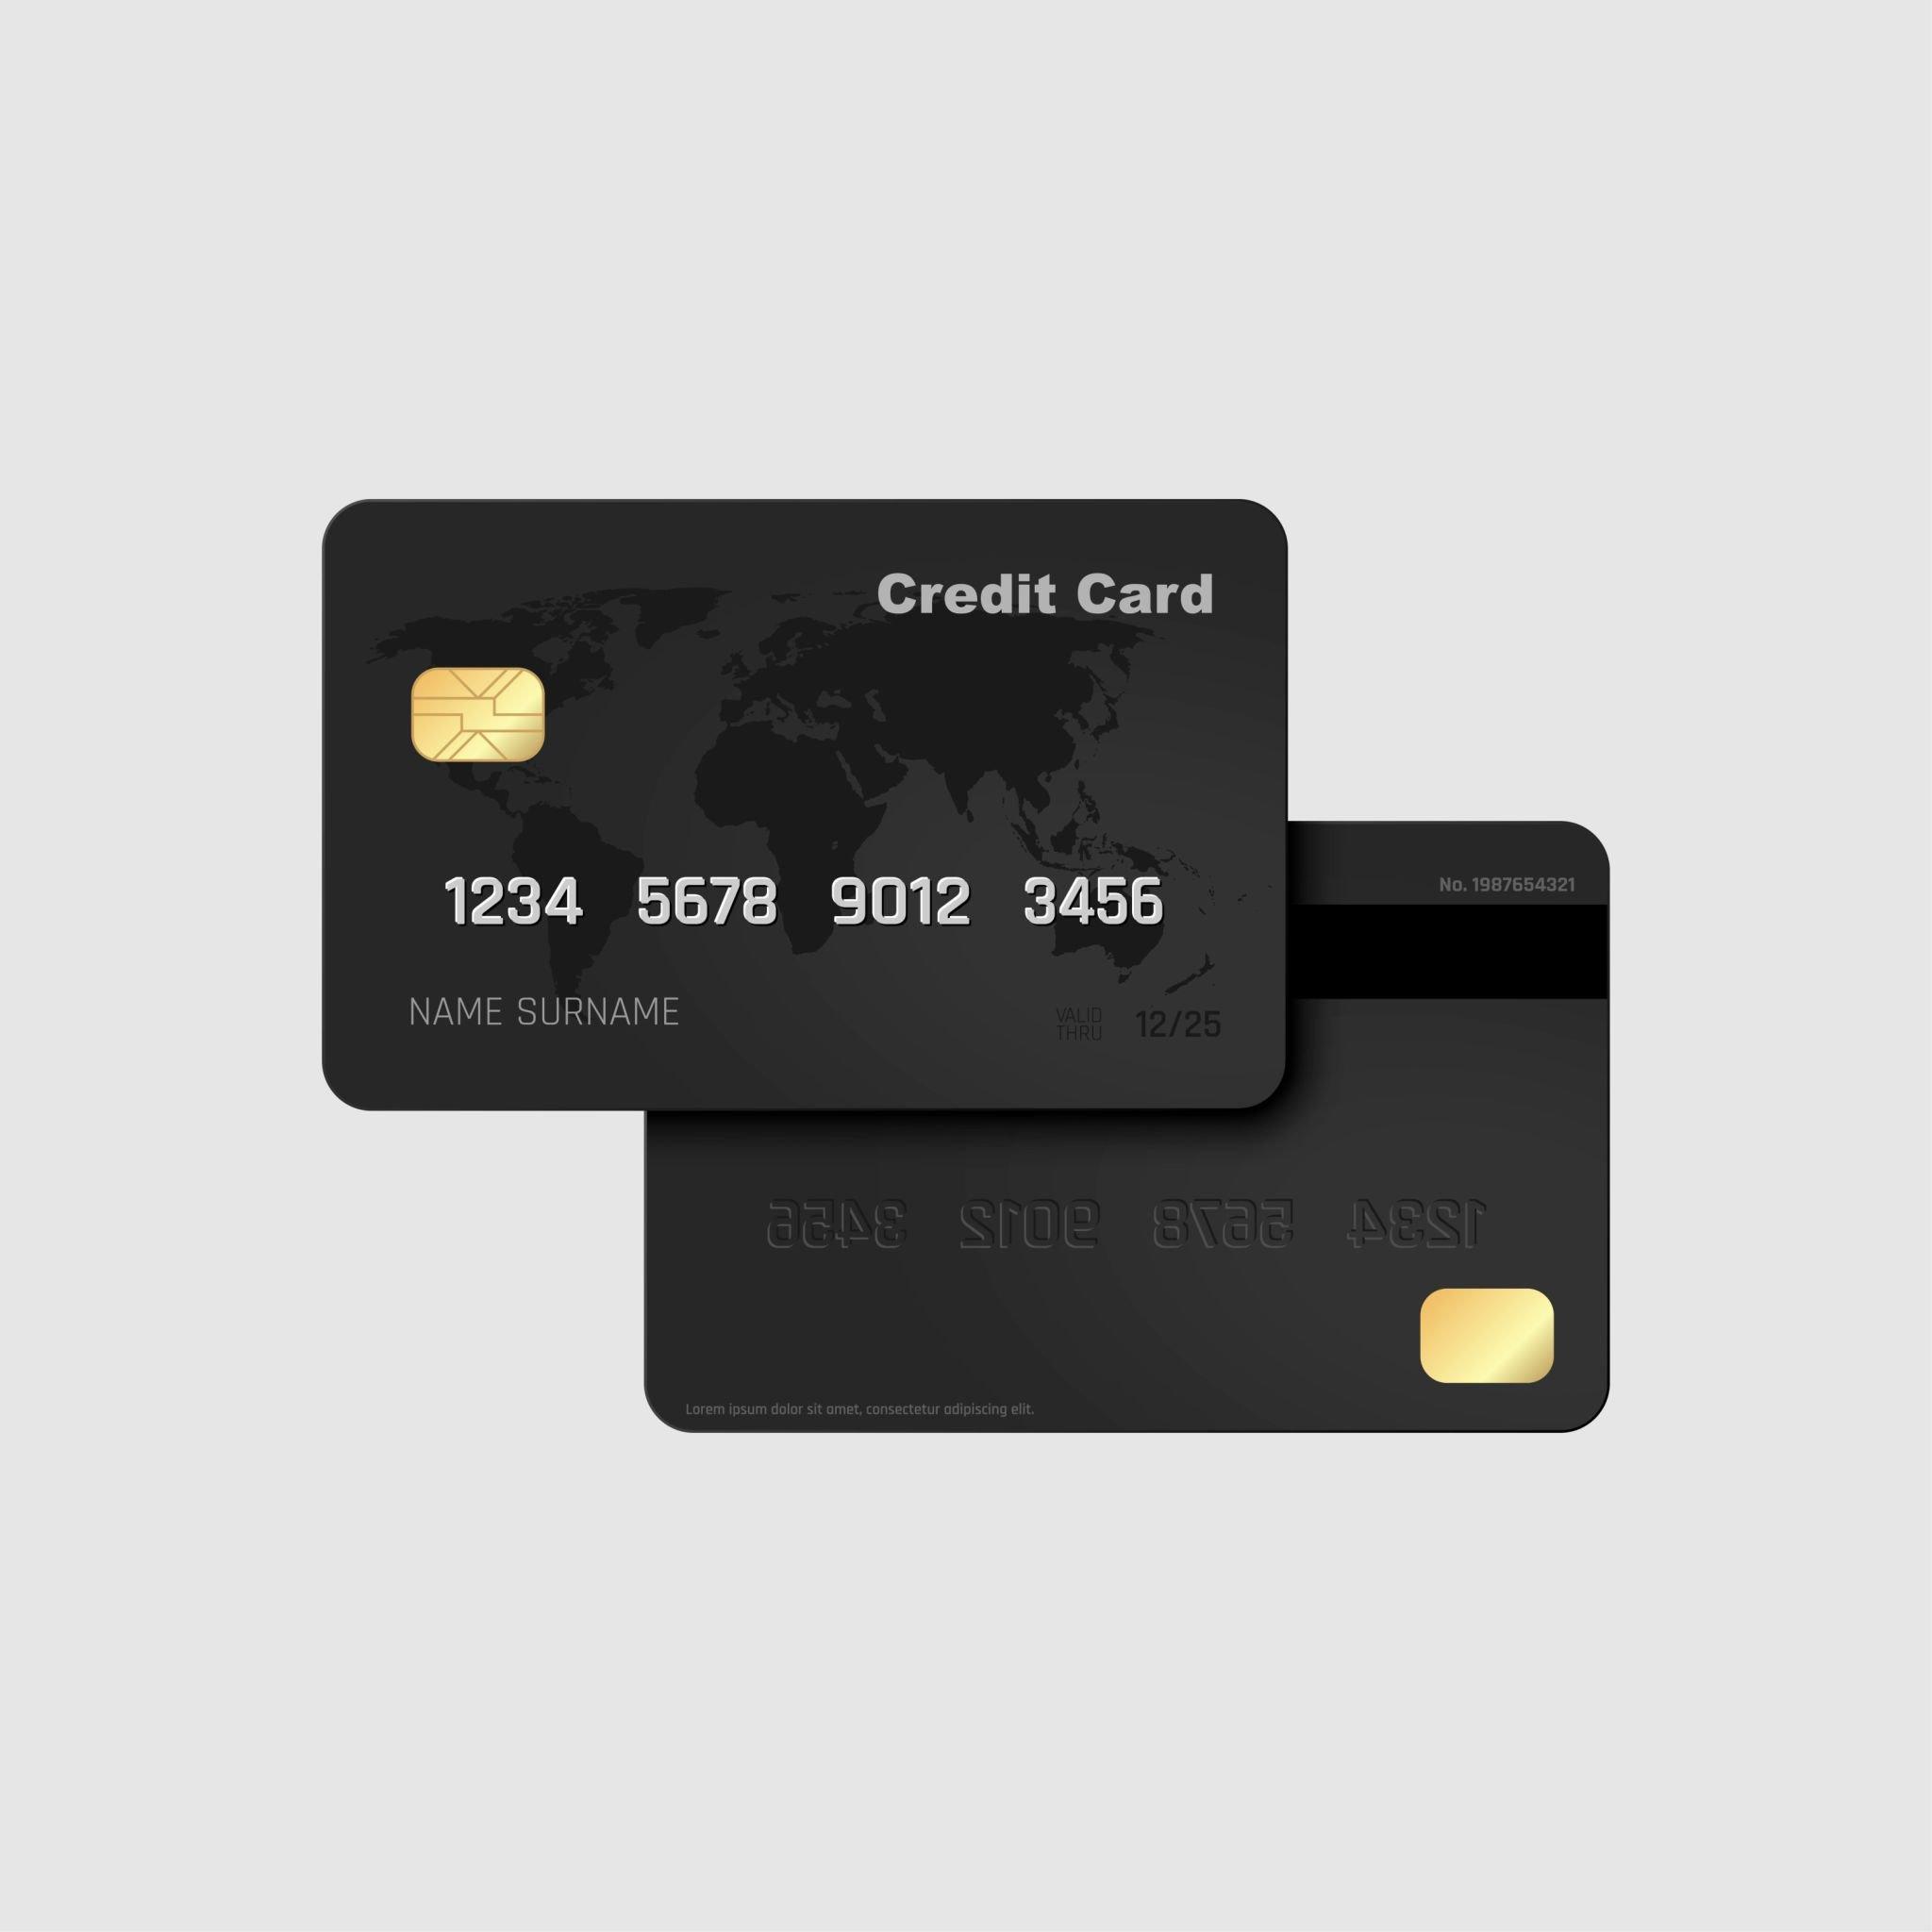 Harbor Freight Credit Card Application